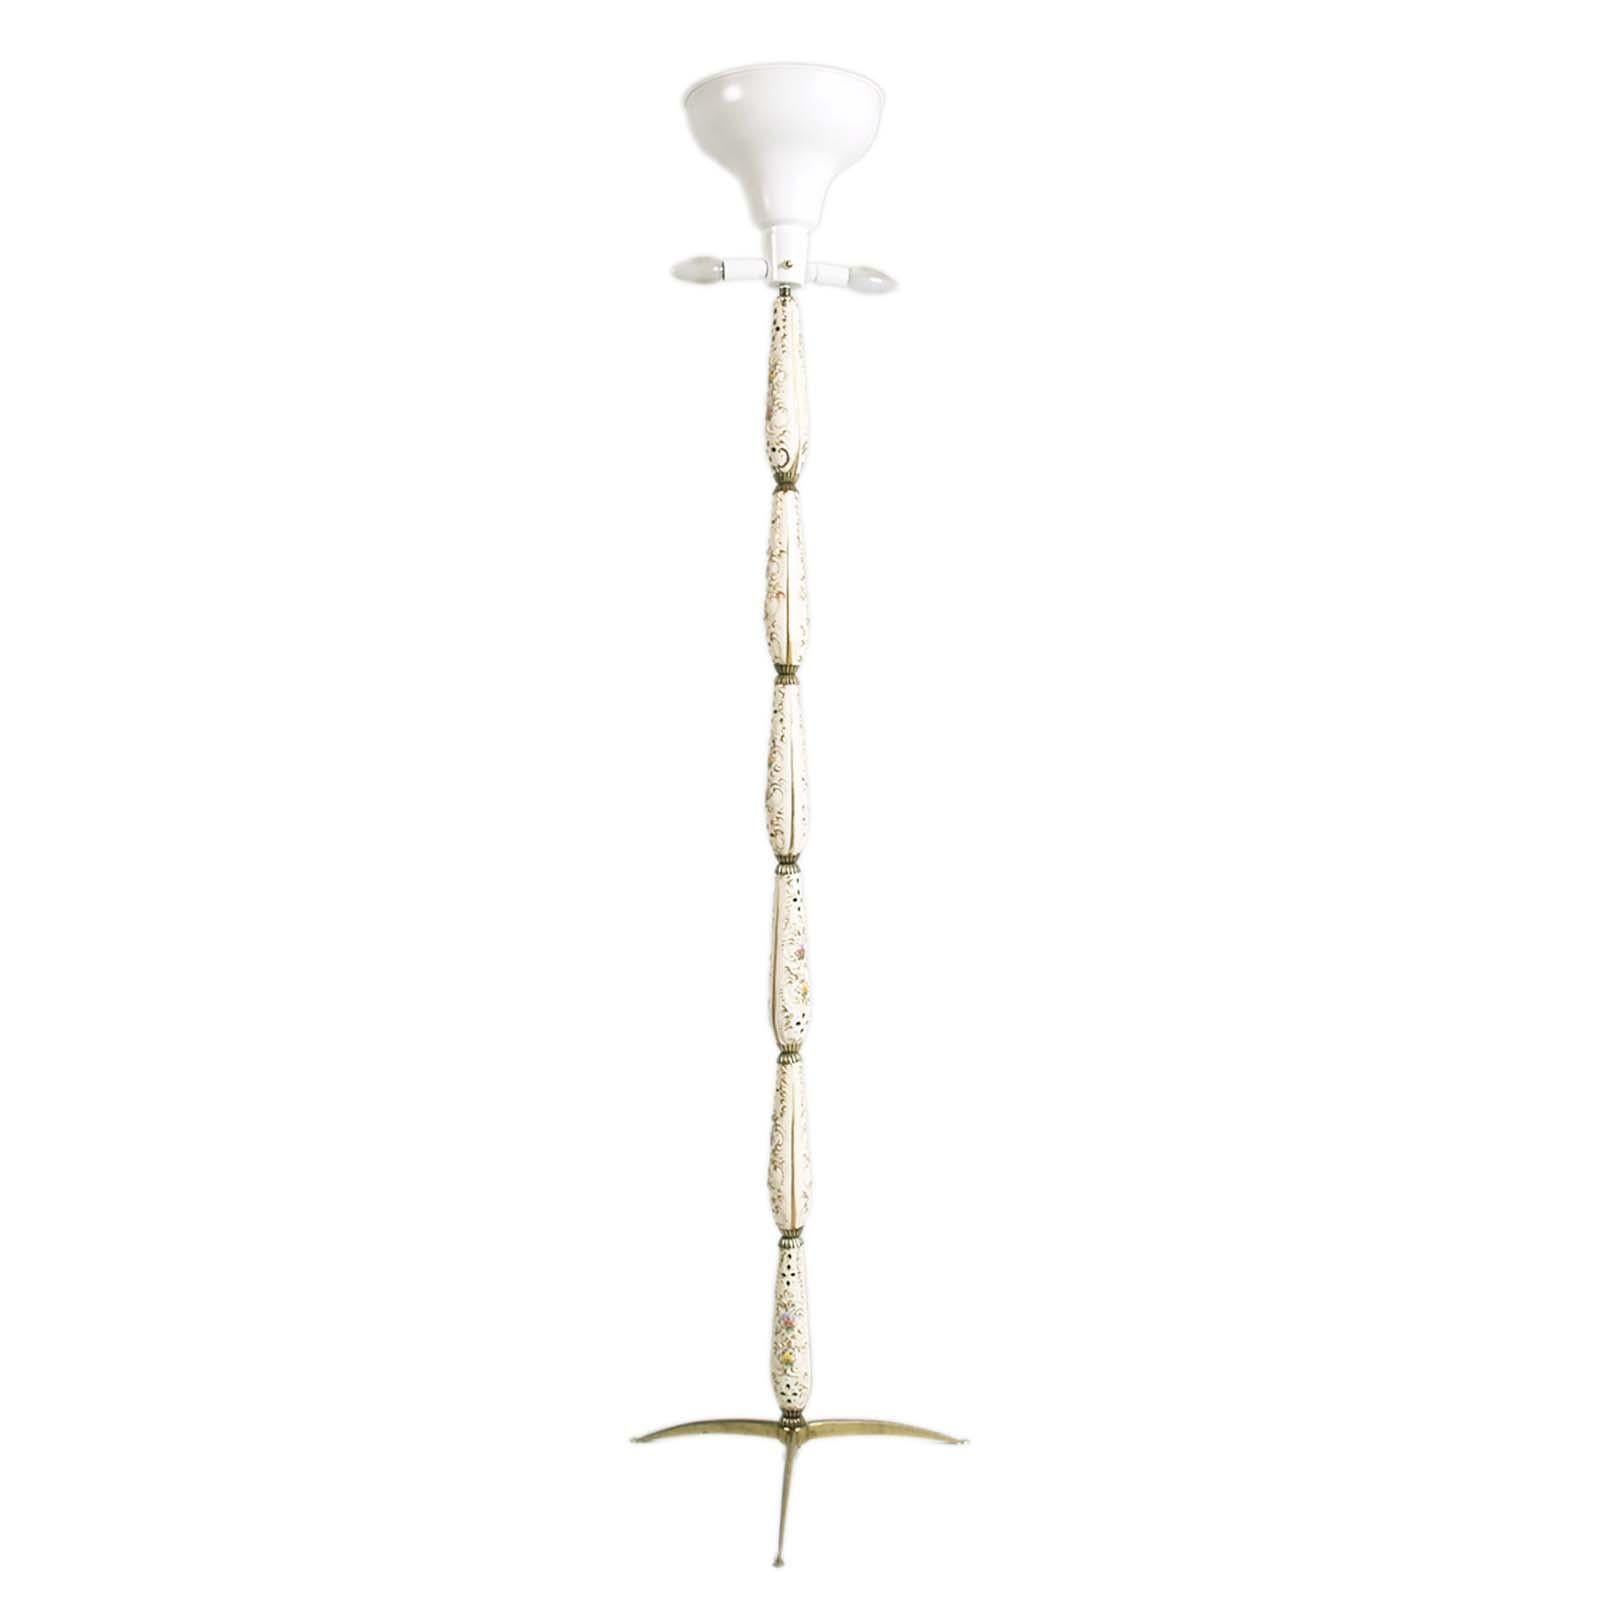 Elegant precious floor lamp with bronze structure and Bassano ceramic inserts, hand decorated,  Gio Ponti style. Number three lights, with overhauled and functioning electrical system.